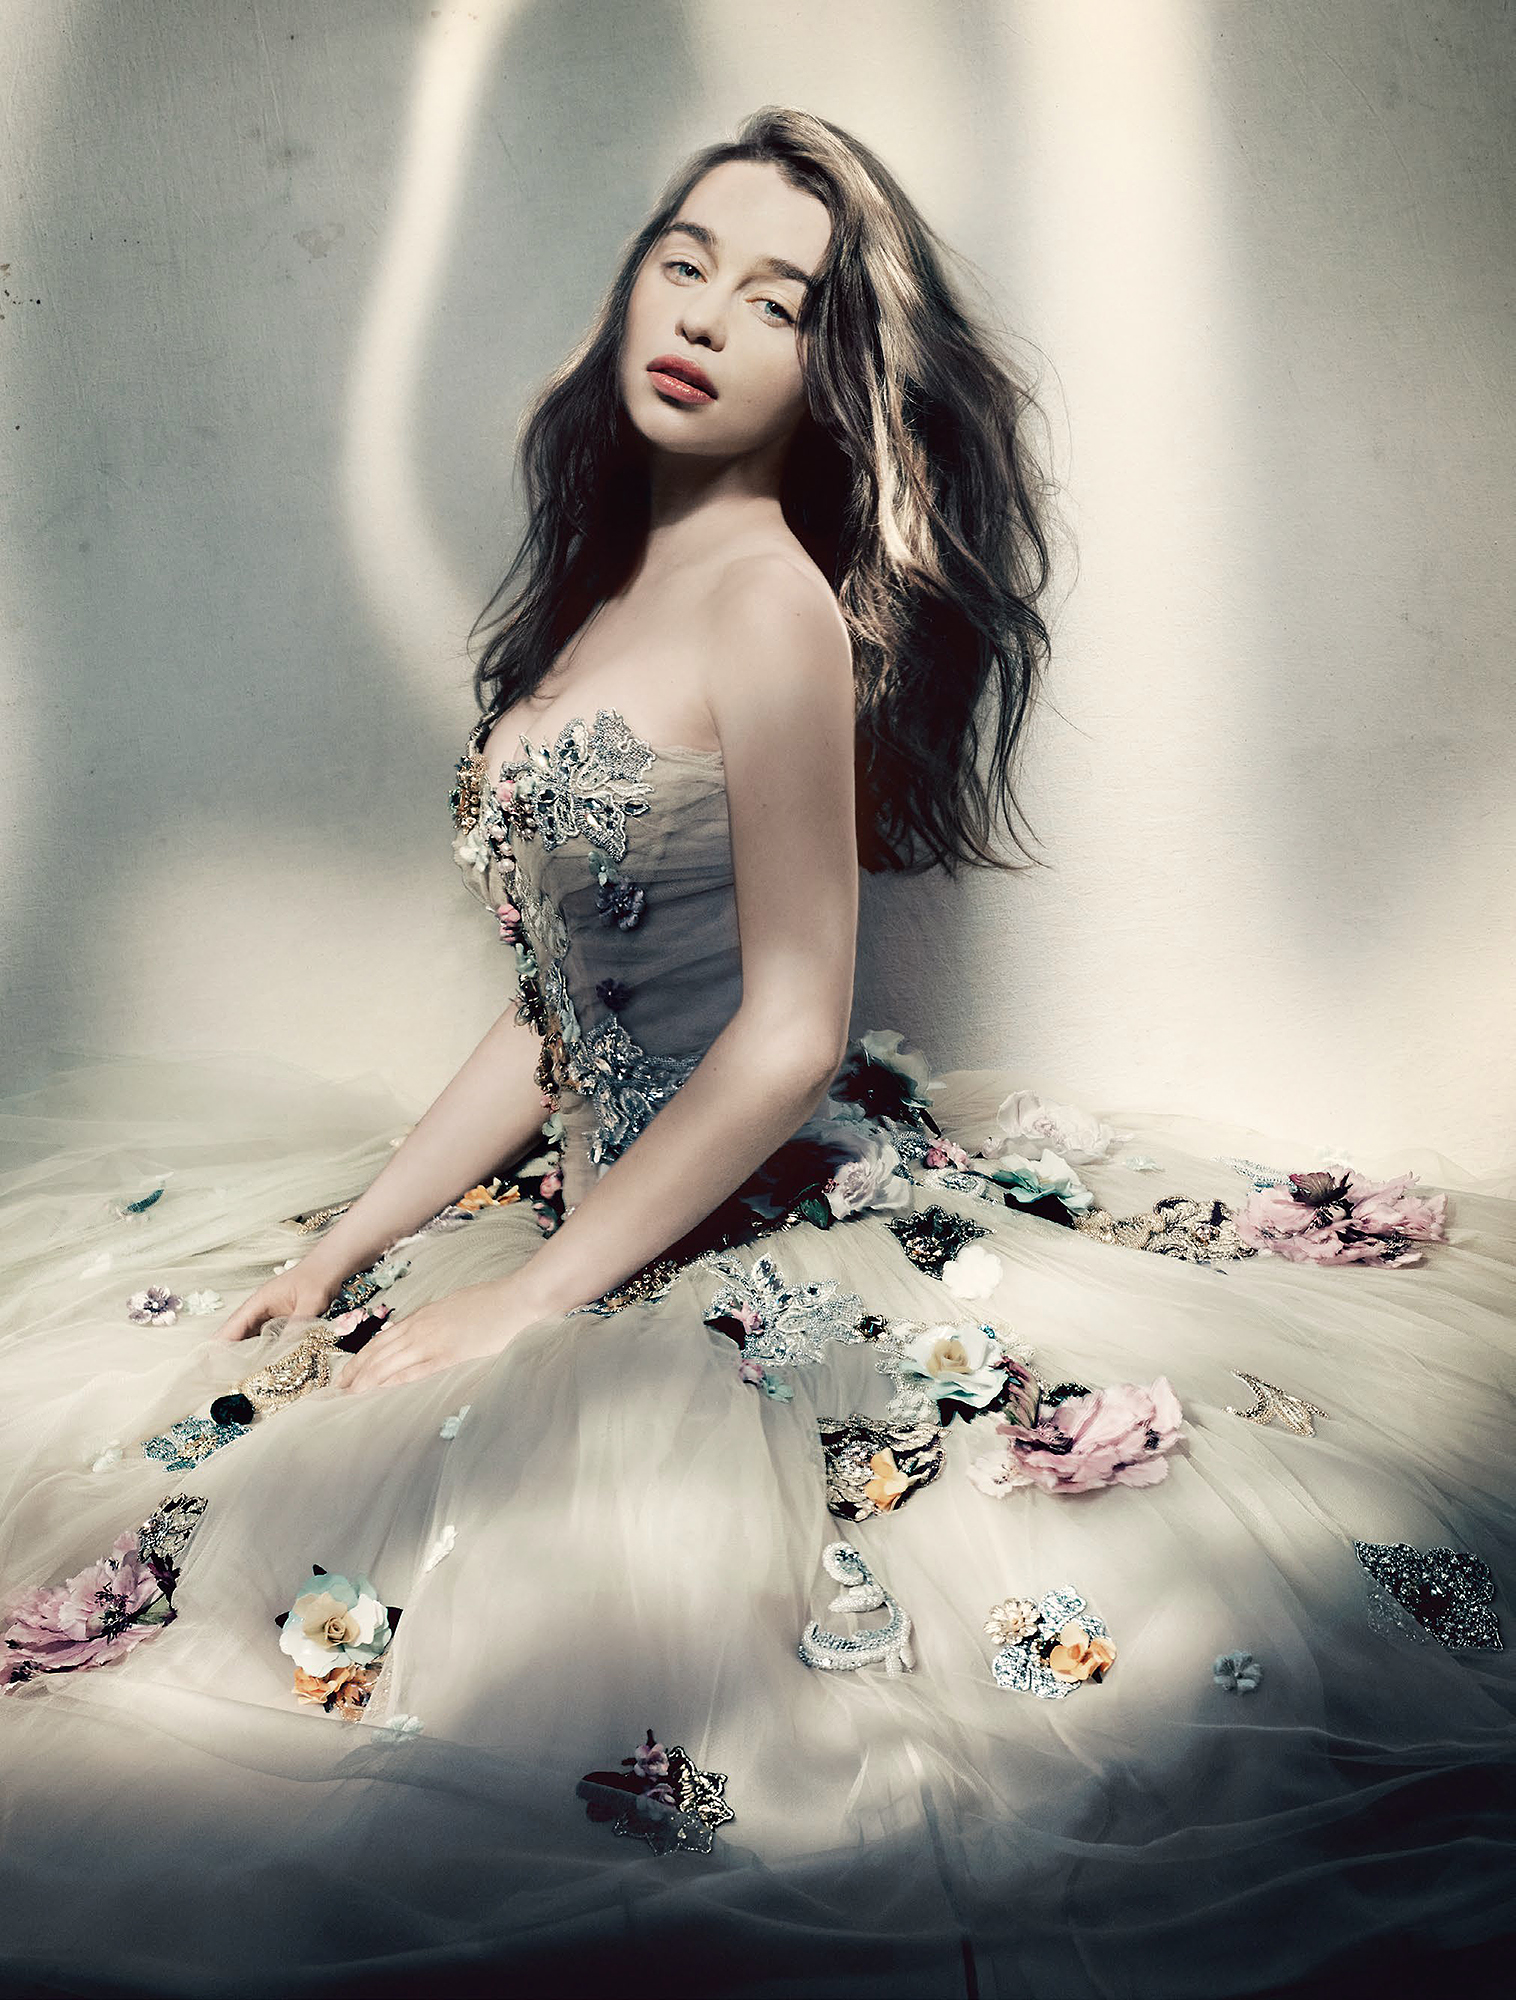 emilia-clarke-by-paolo-roversi-for-vogue-uk-may-2015-floral-embellished-gown